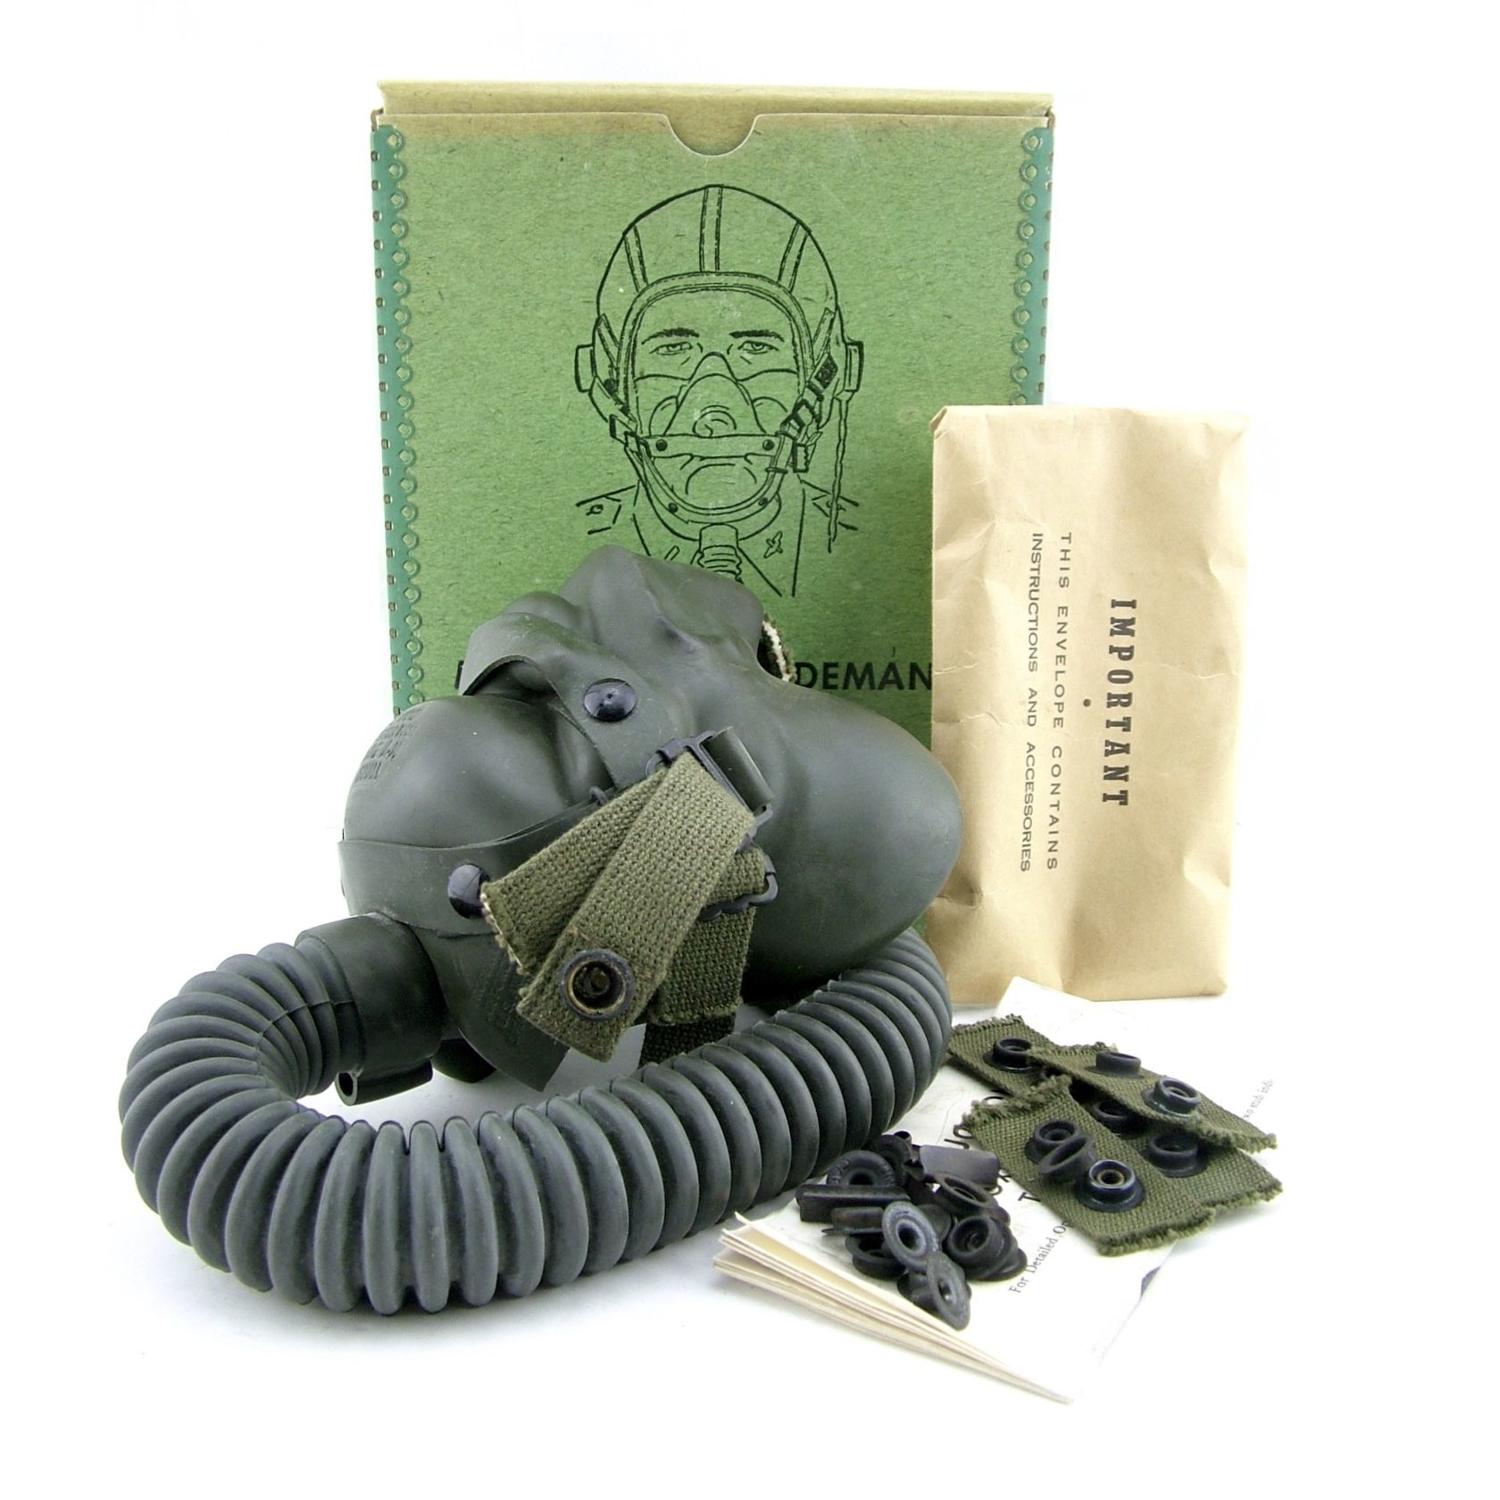 USAAF A-14 oxygen mask, boxed